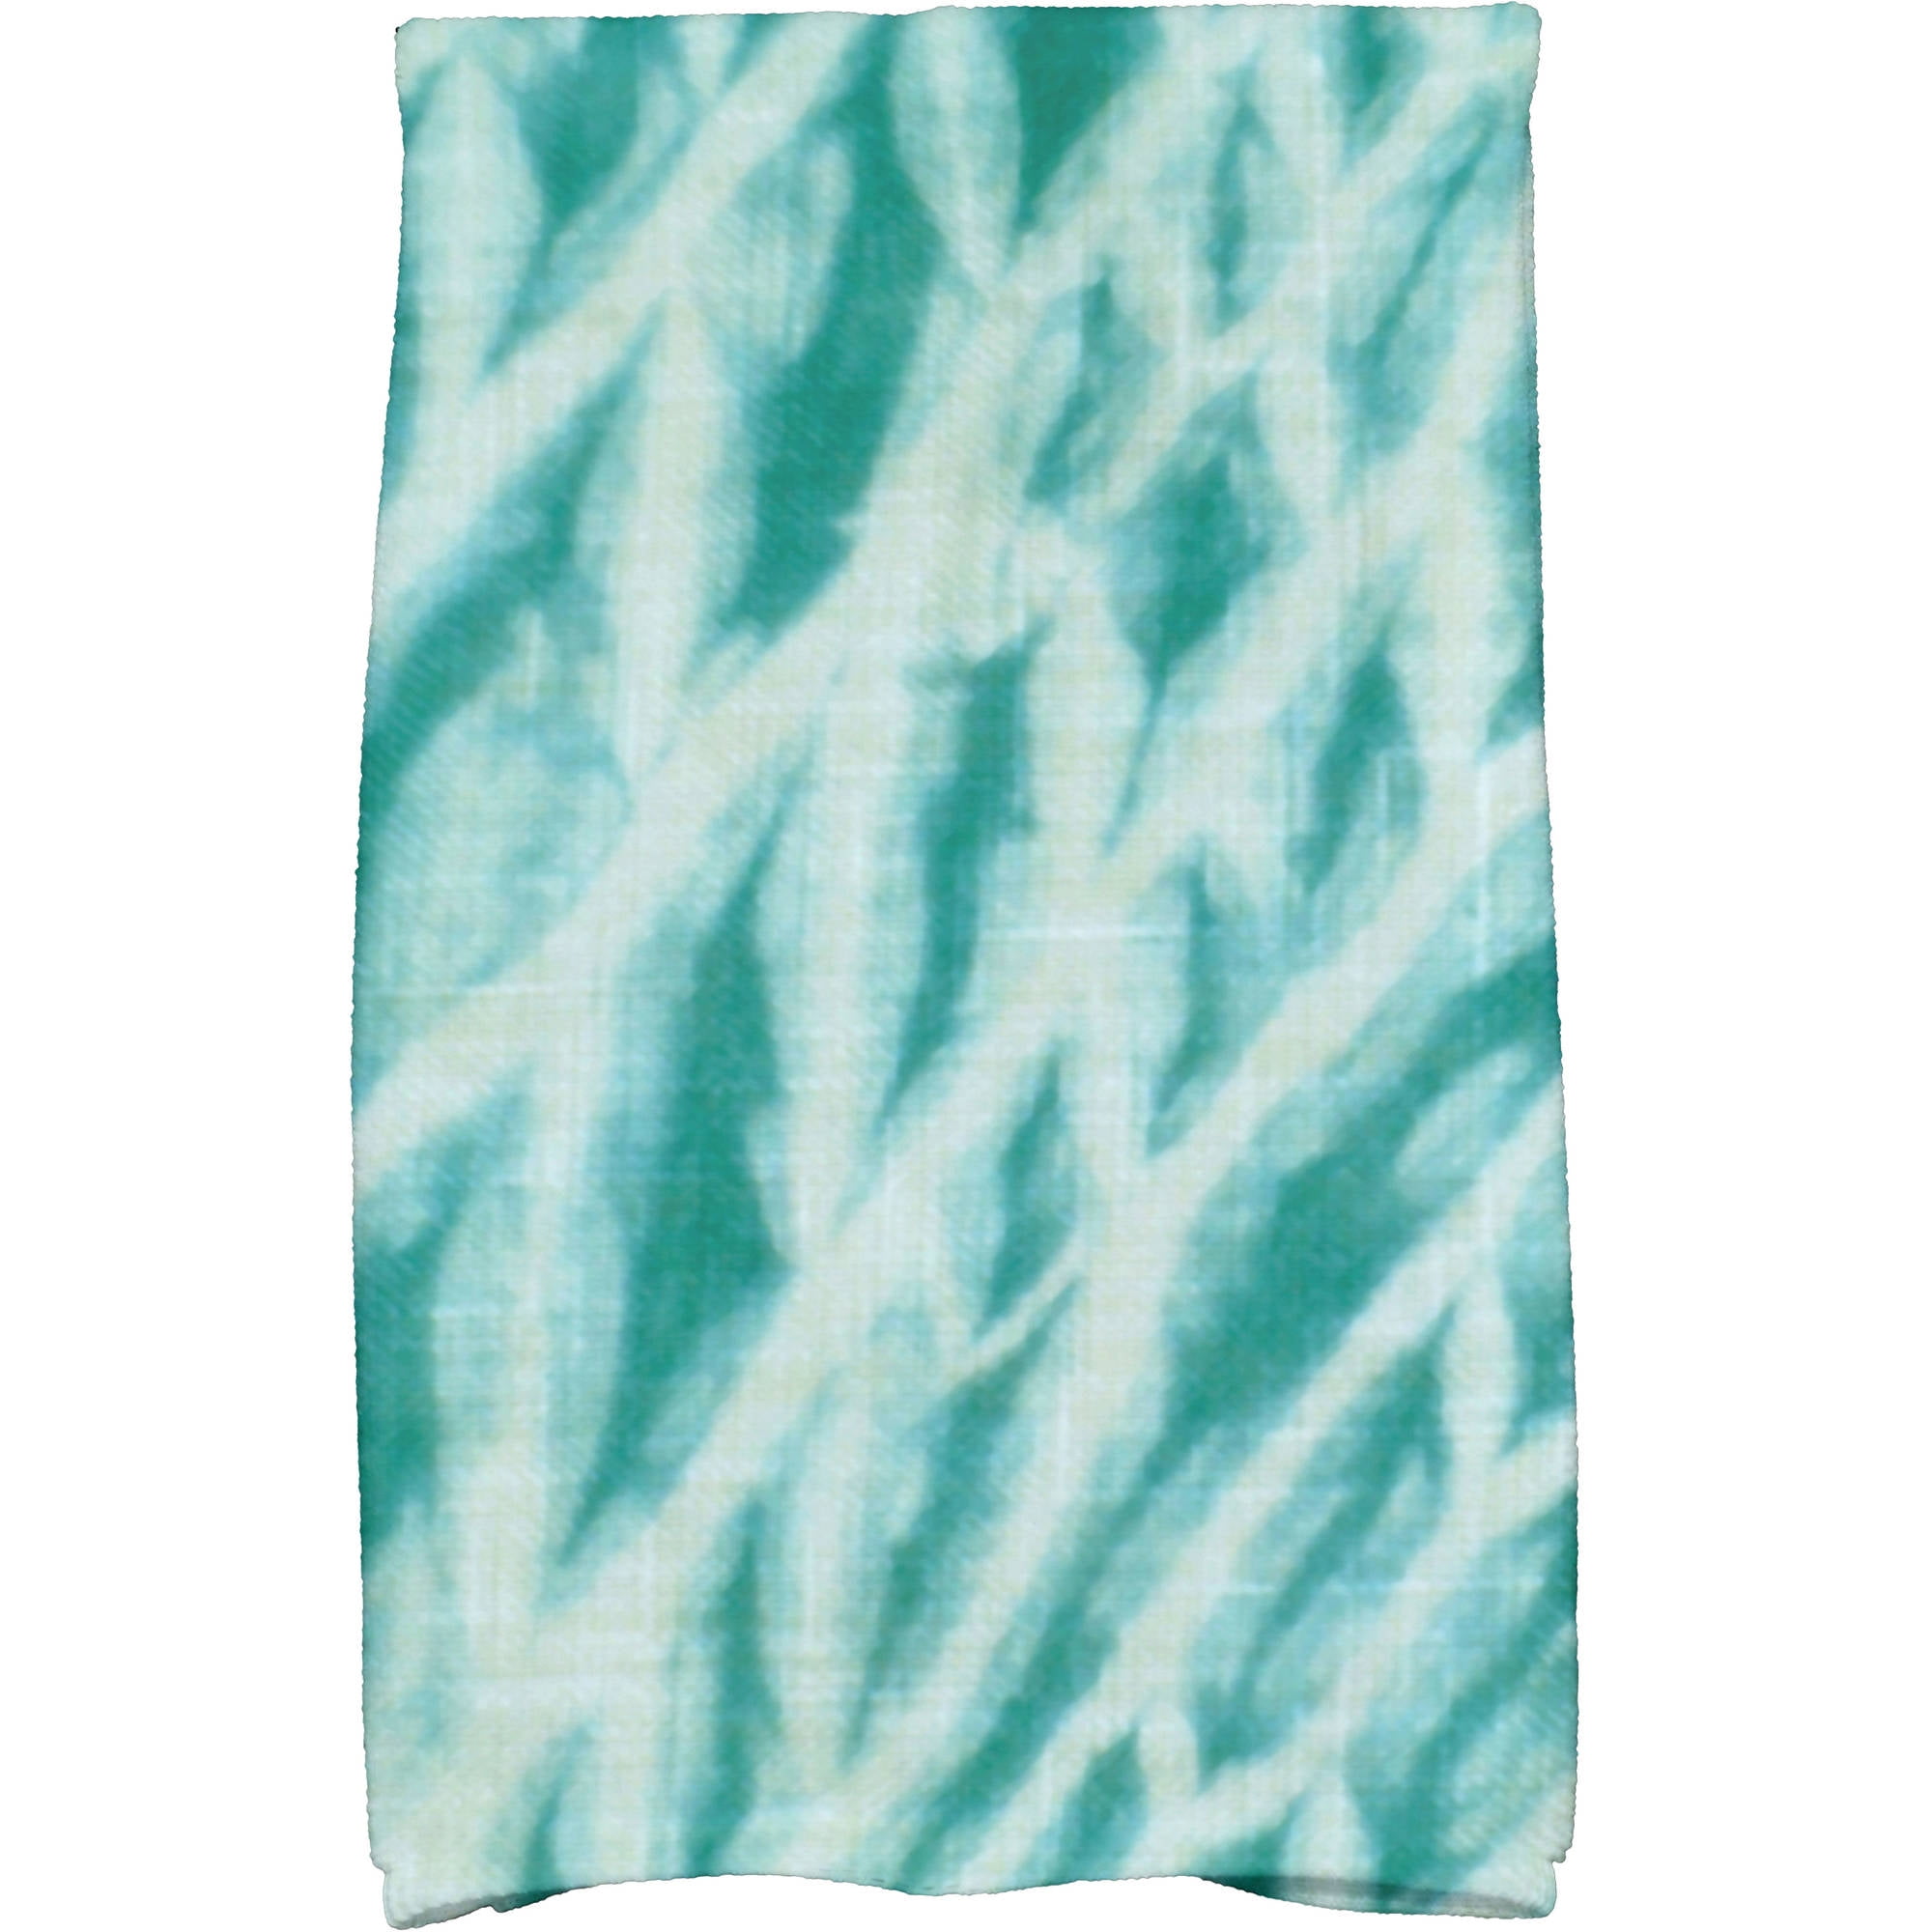 Evergreen Rugby Stripe Beach Towel Blue 3 pc pack, 32x62 inches 